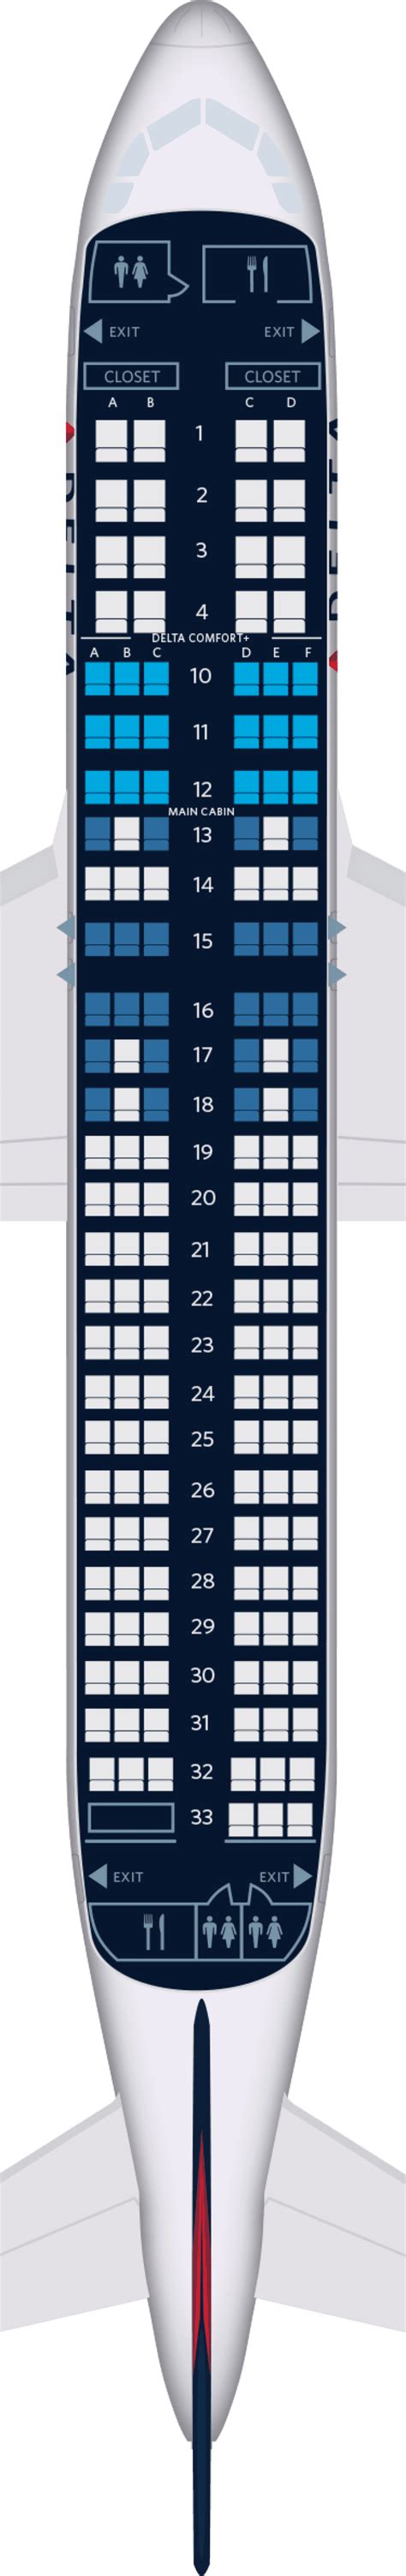 Airbus A320 Seat Map Black Sea Map